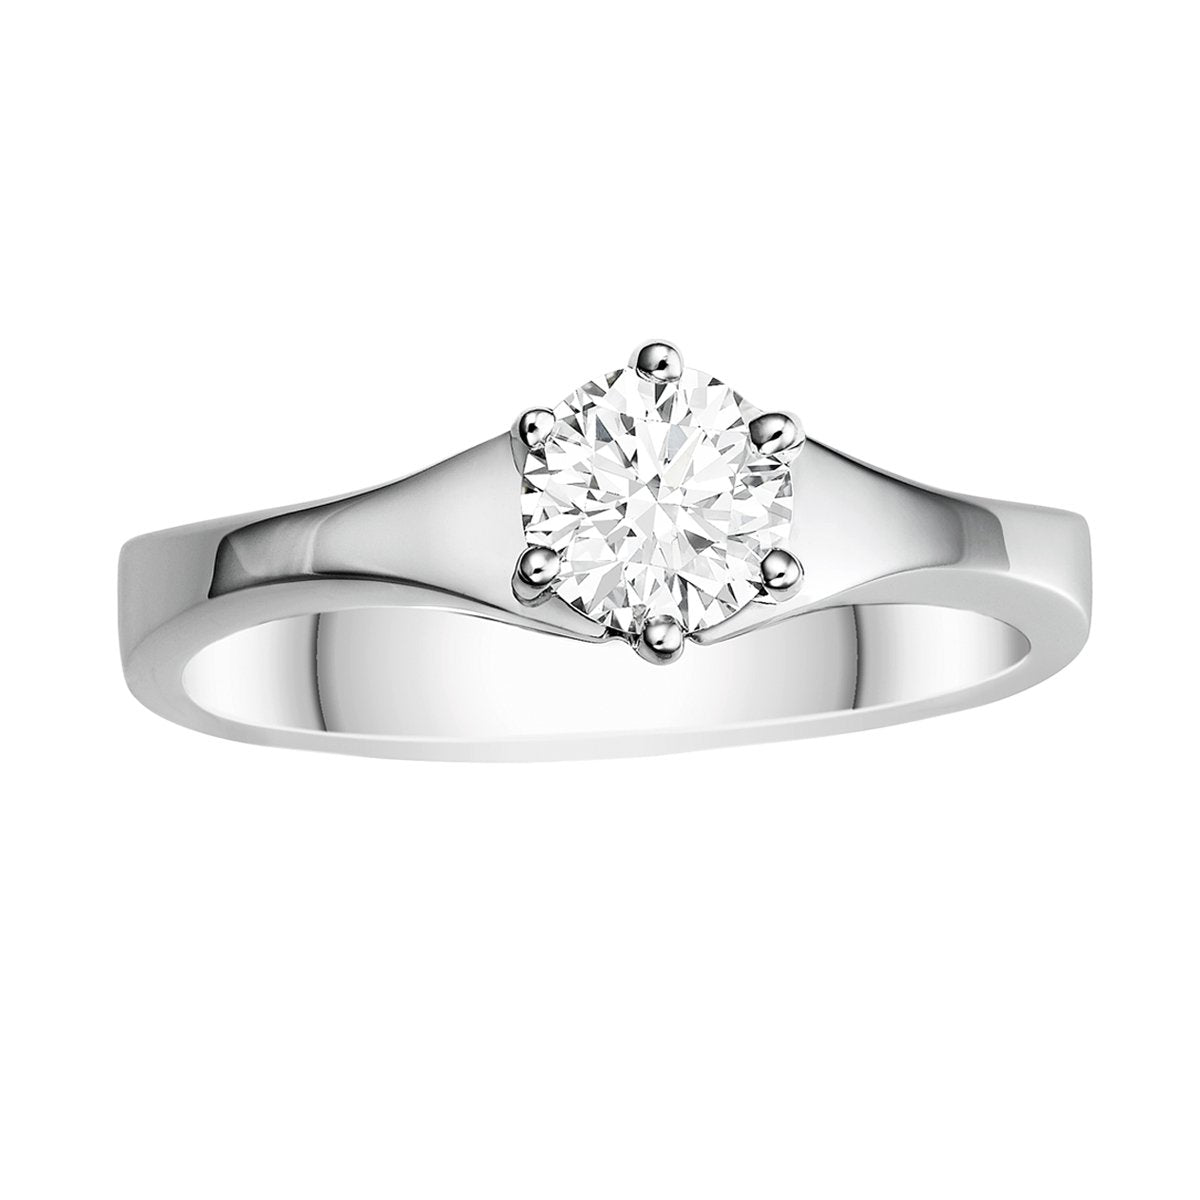 Diamond six-claw solitaire ring